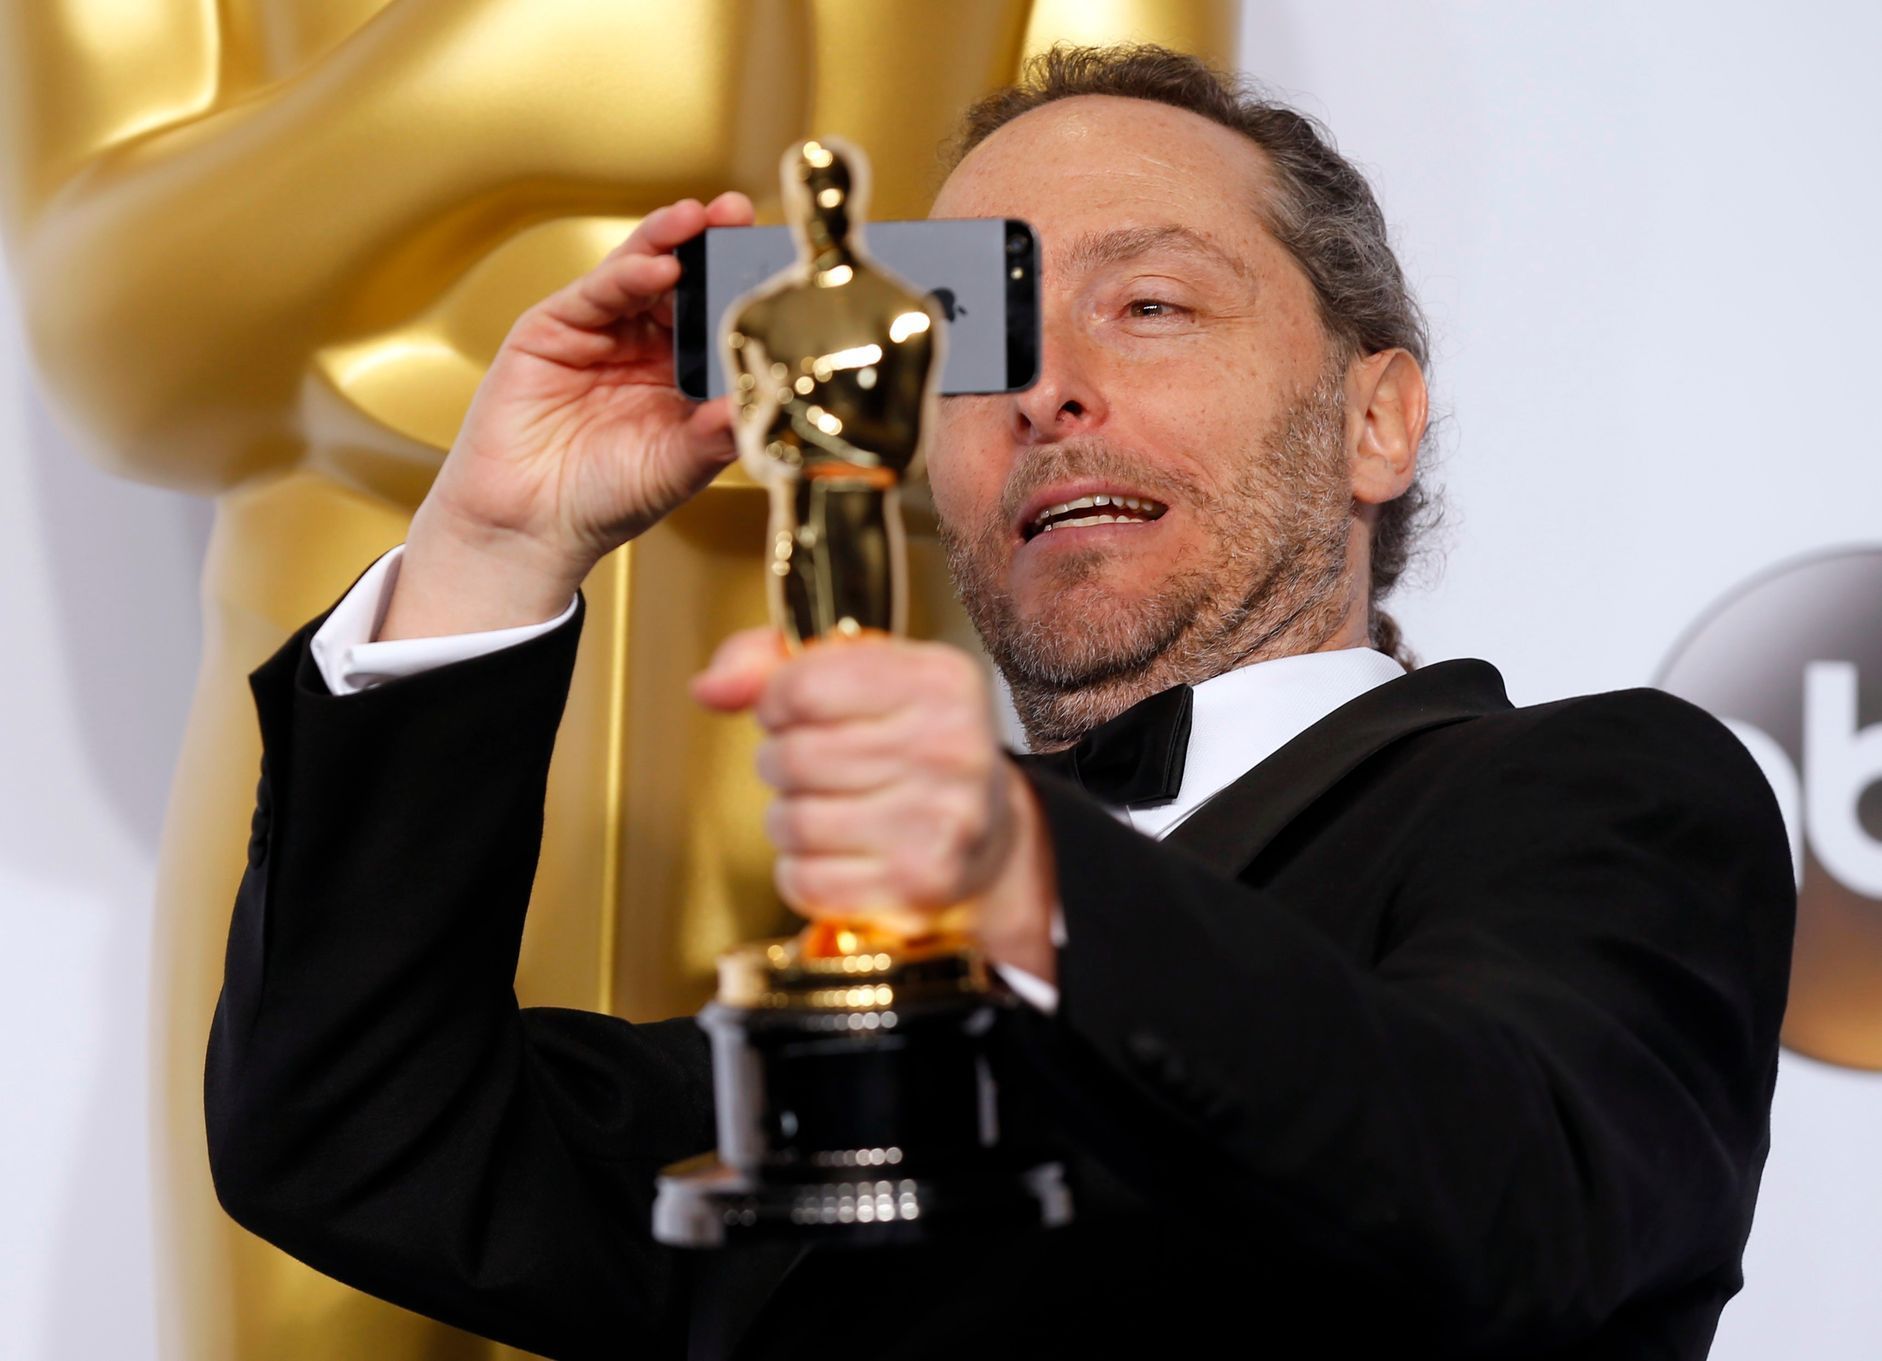 Emmanuel Lubezki poses with the Oscar for best cinematography for the film &quot;Birdman or (The Unexpected Virture of Ignorance),&quot; during the 87th Academy Awards in Hollywood